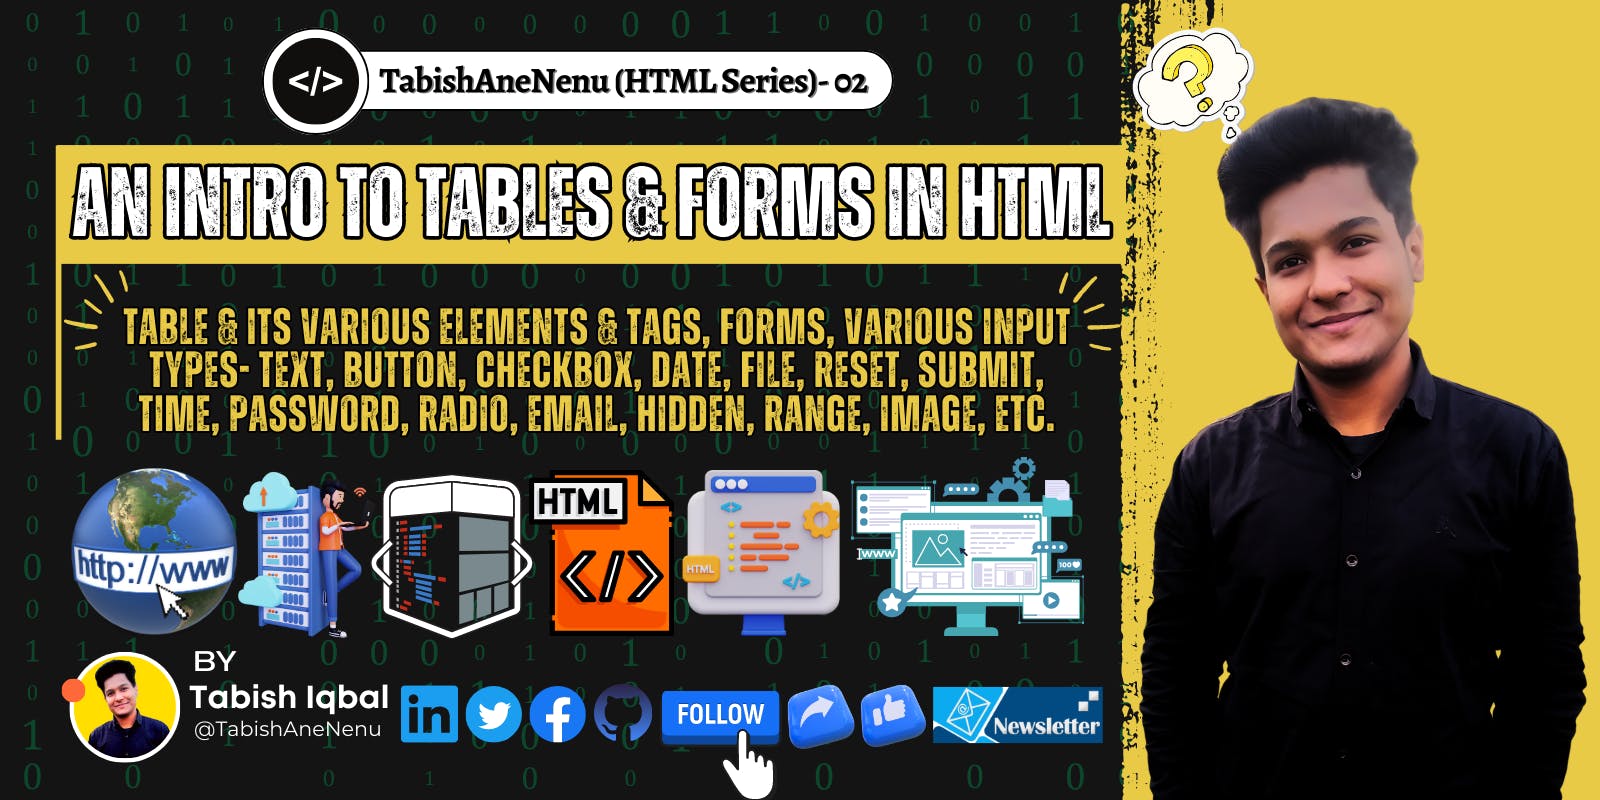 An Introduction to Tables & Forms in HTML